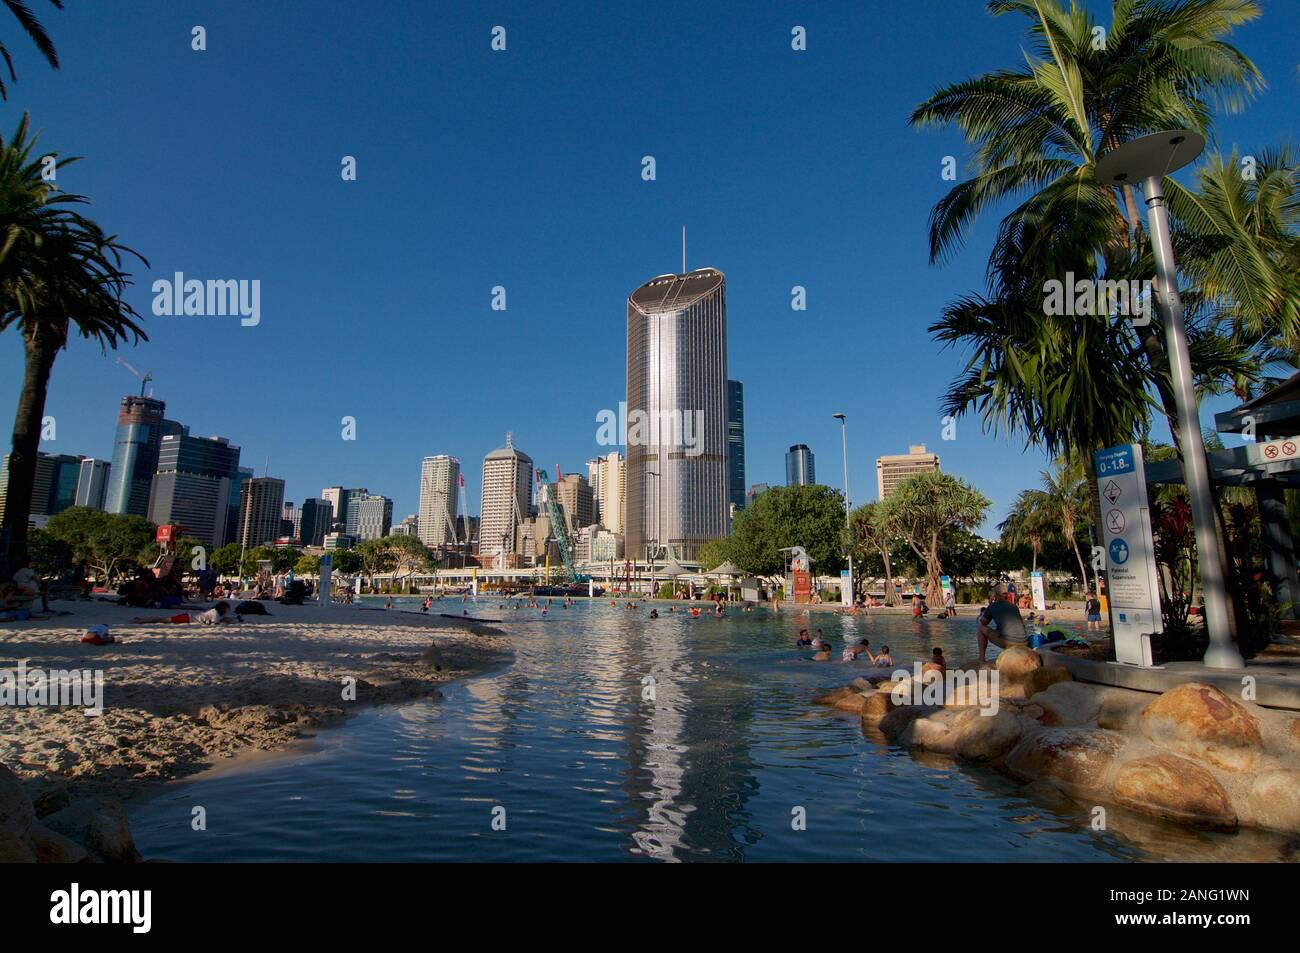 Brisbane, Queensland, Australia - 17th December 2019 : View of South Bank artificial street beach and pools on a sunny day with many tourists enjoying Stock Photo